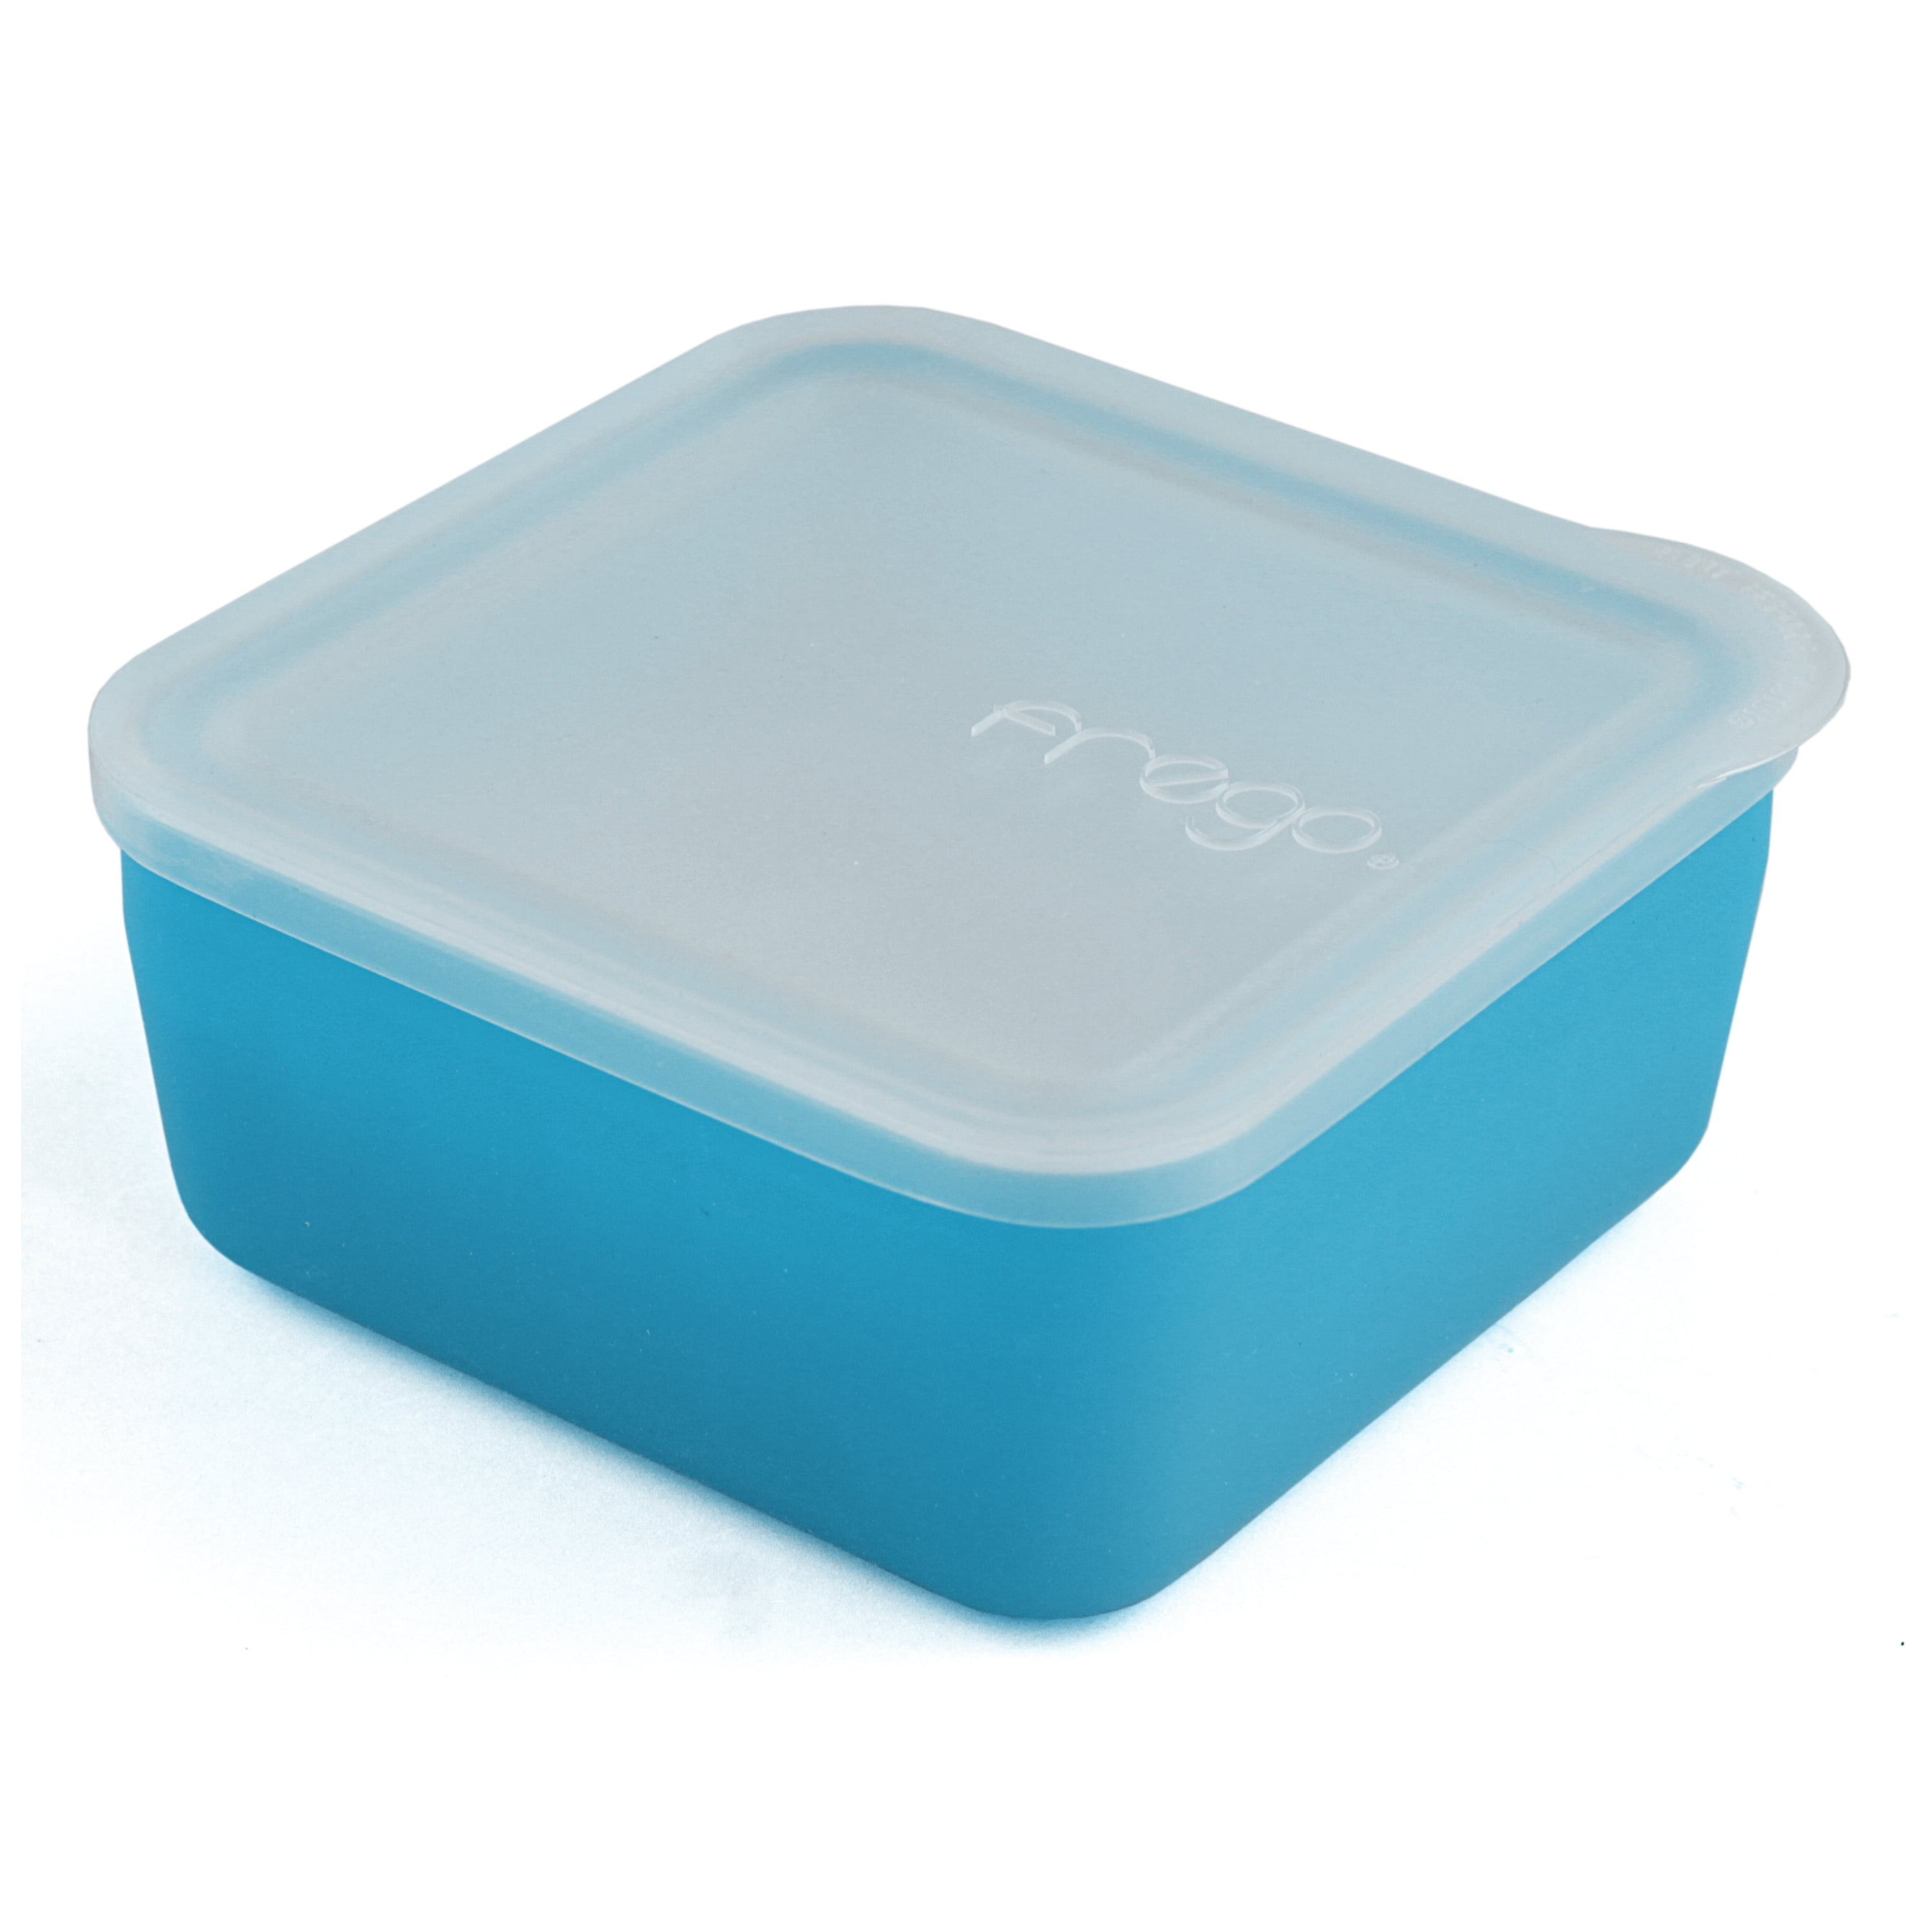 Frego Glass and Blue Silicone Non-Toxic 2 Cup Food Storage Container 